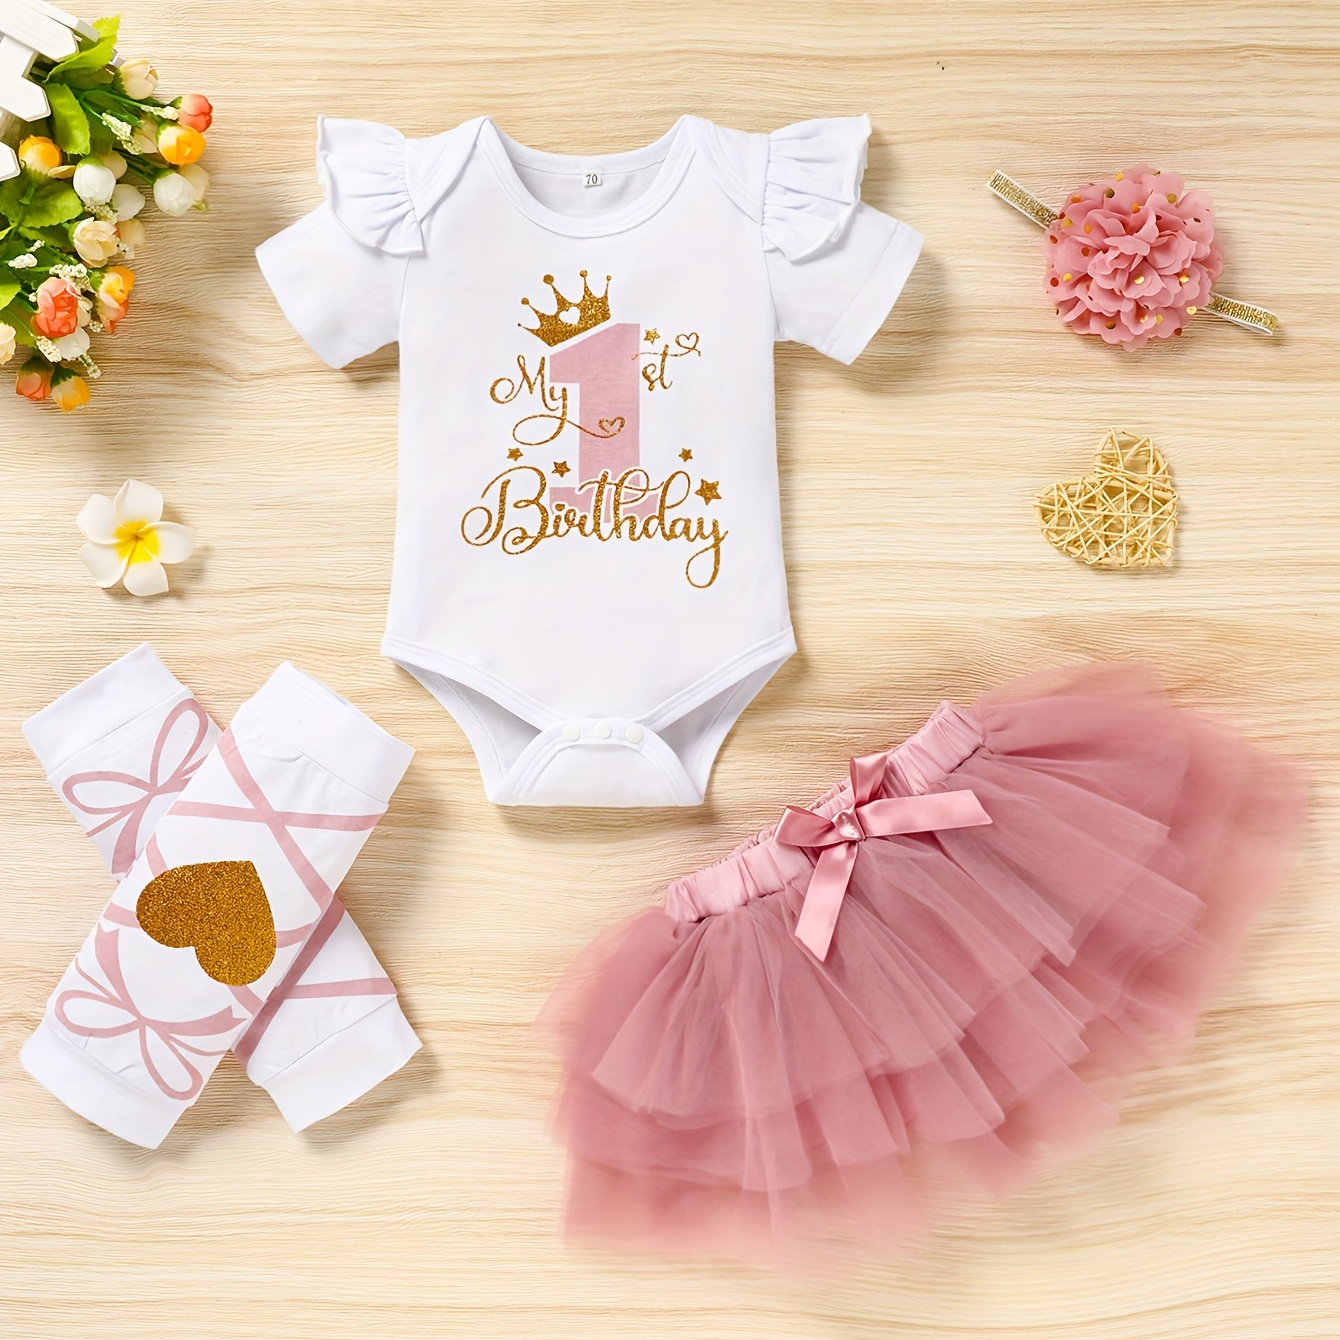 

Baby Girl First Birthday Outfit Smash Cake Outfit My 1st Birthday Romper+tutu Skirt+headband Onederland Outfit